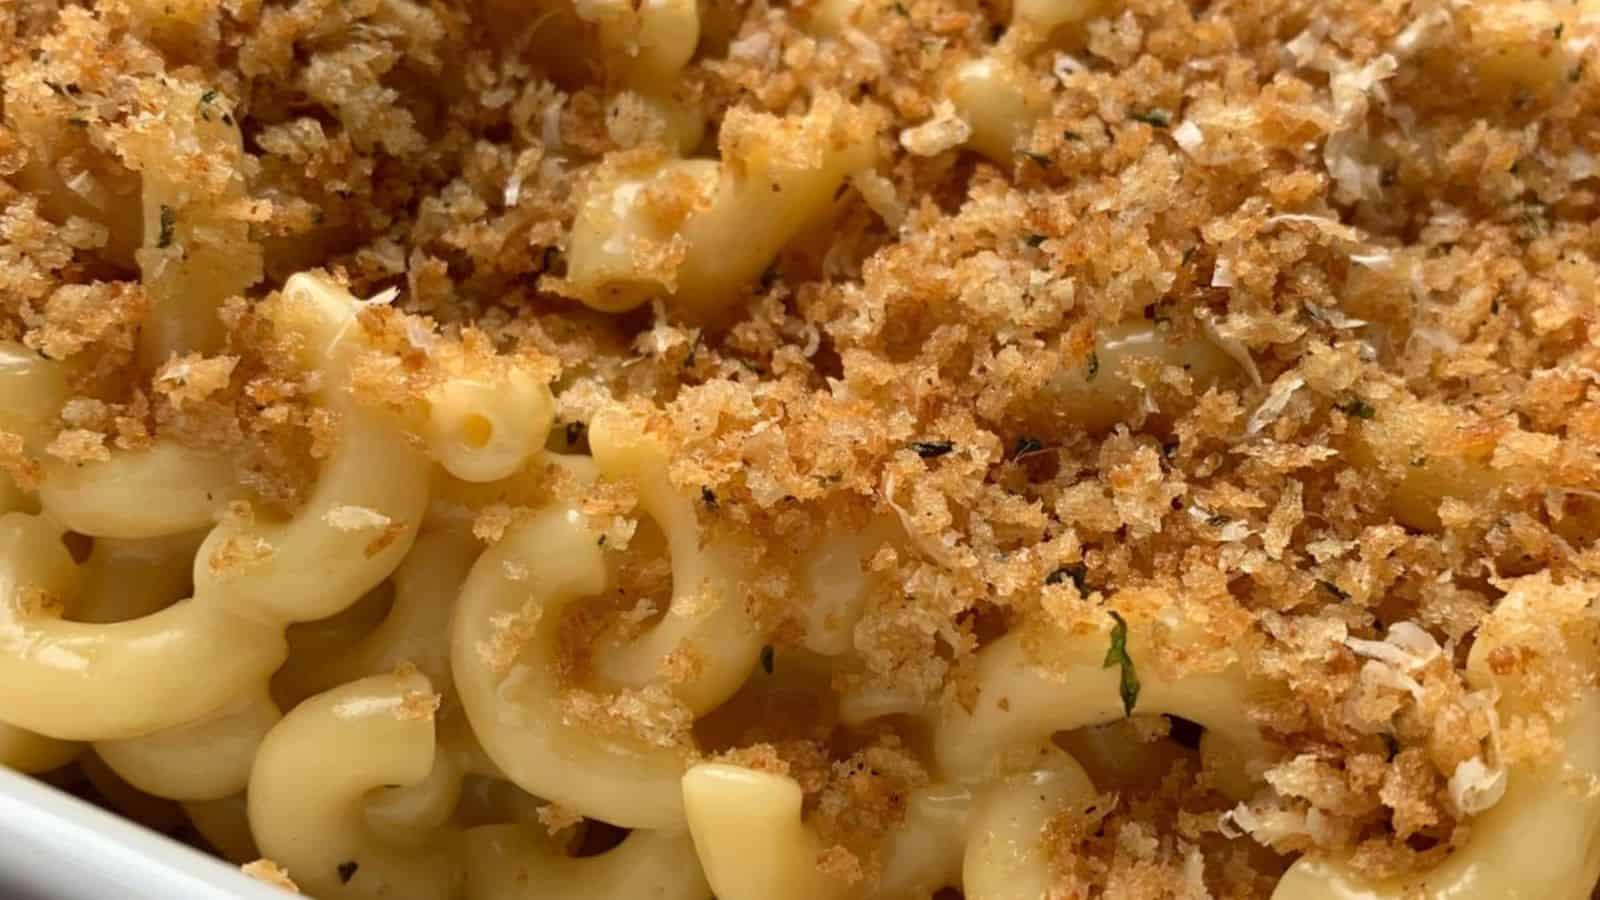 Macaroni pasta bathed in melty cheese sauce with breadcrumb topping.